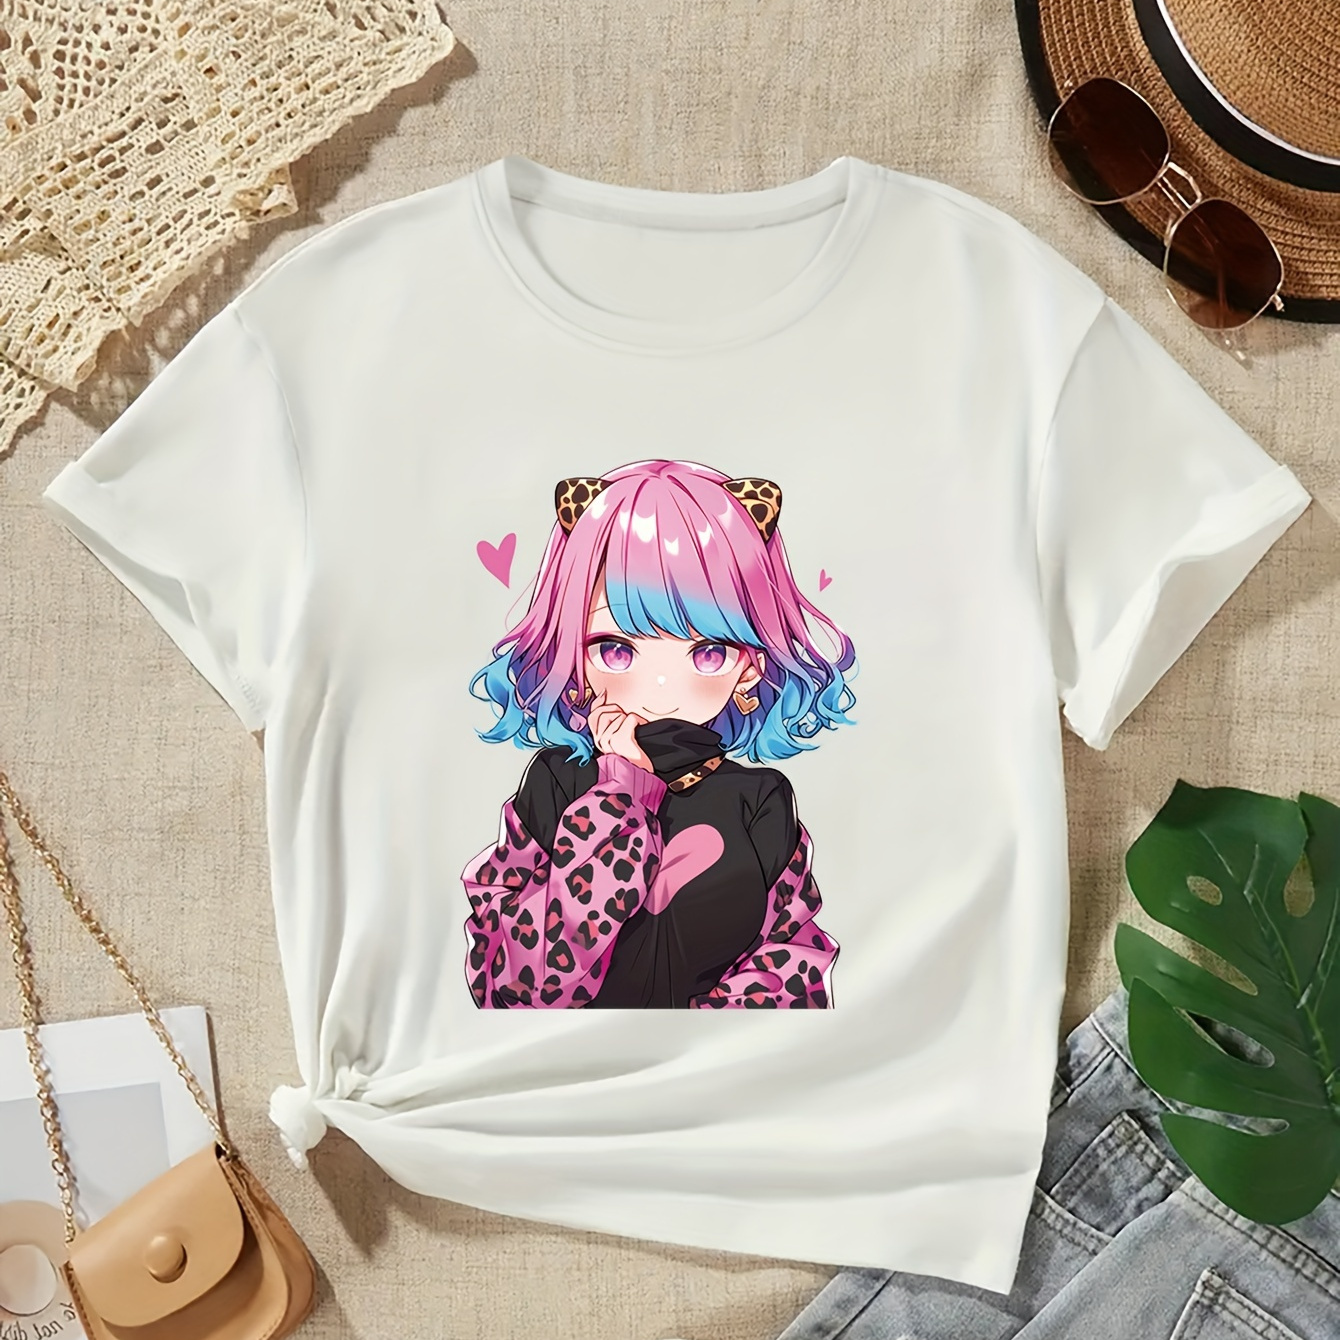 

Anime Girl Graphic Print Tee, Girls' Casual & Trendy Crew Neck Short Sleeve T-shirt For Spring & Summer, Girls' Clothes For Everyday Life